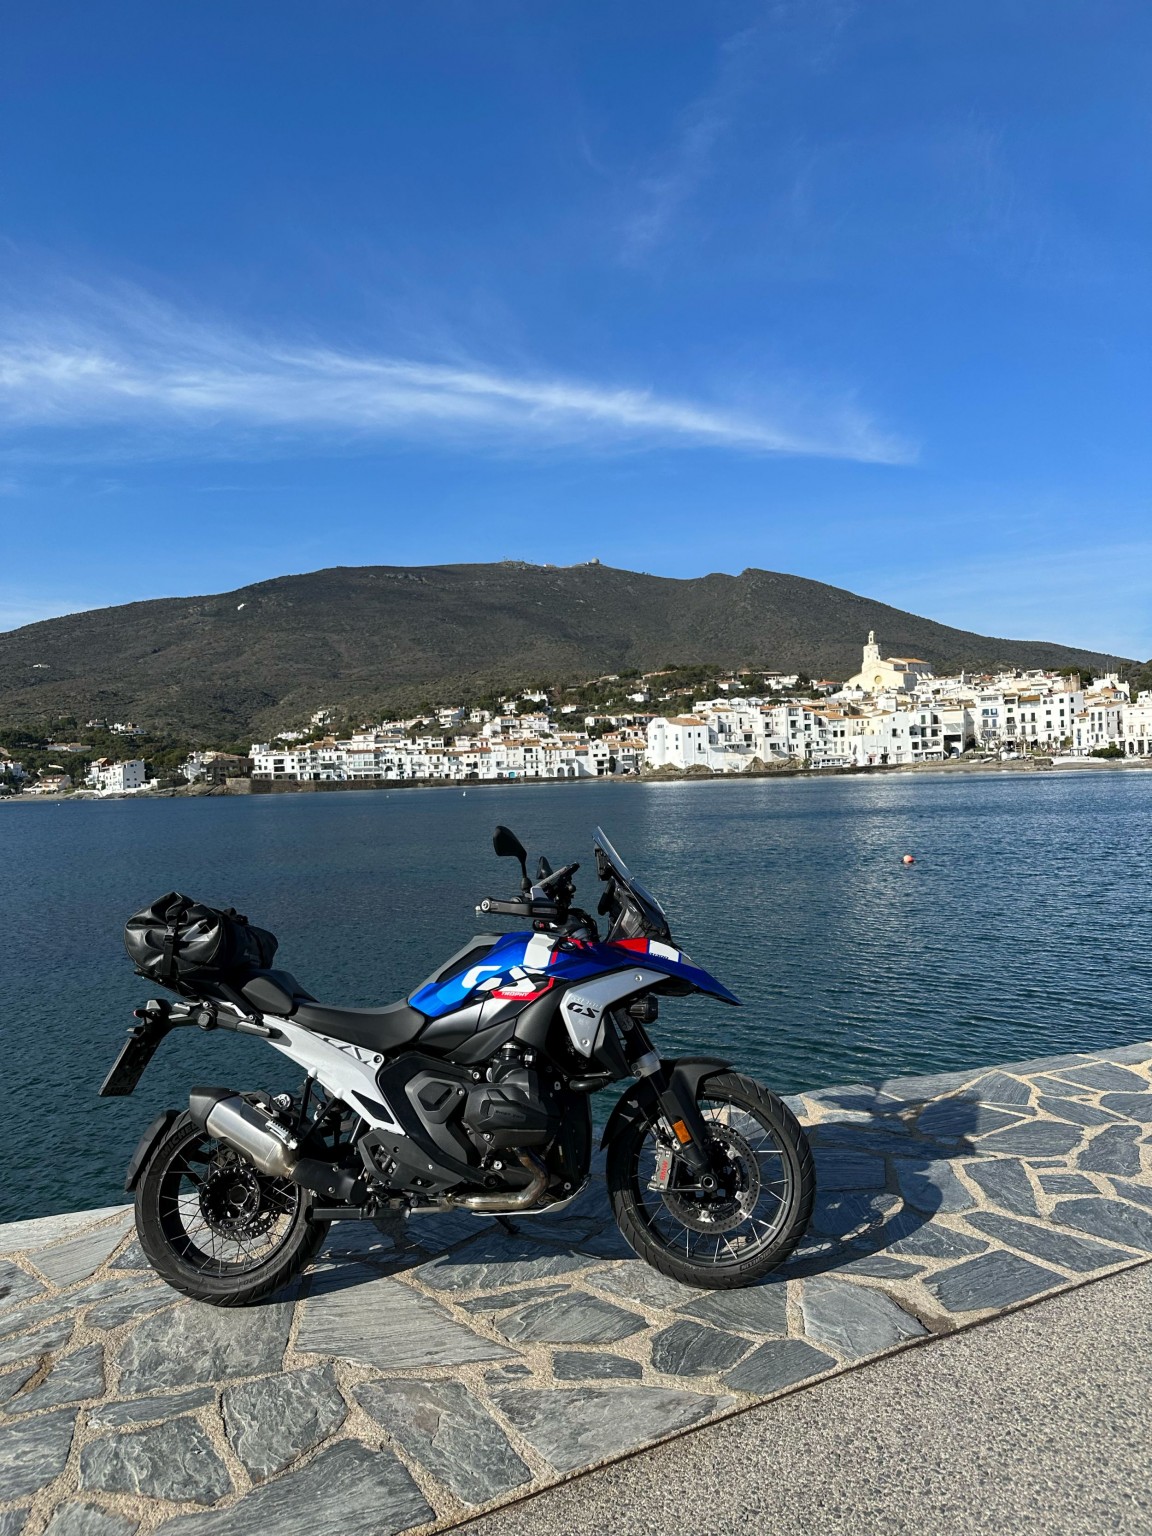 BMW R 1300 GS road test - from Barcelona to Vienna - Image 5